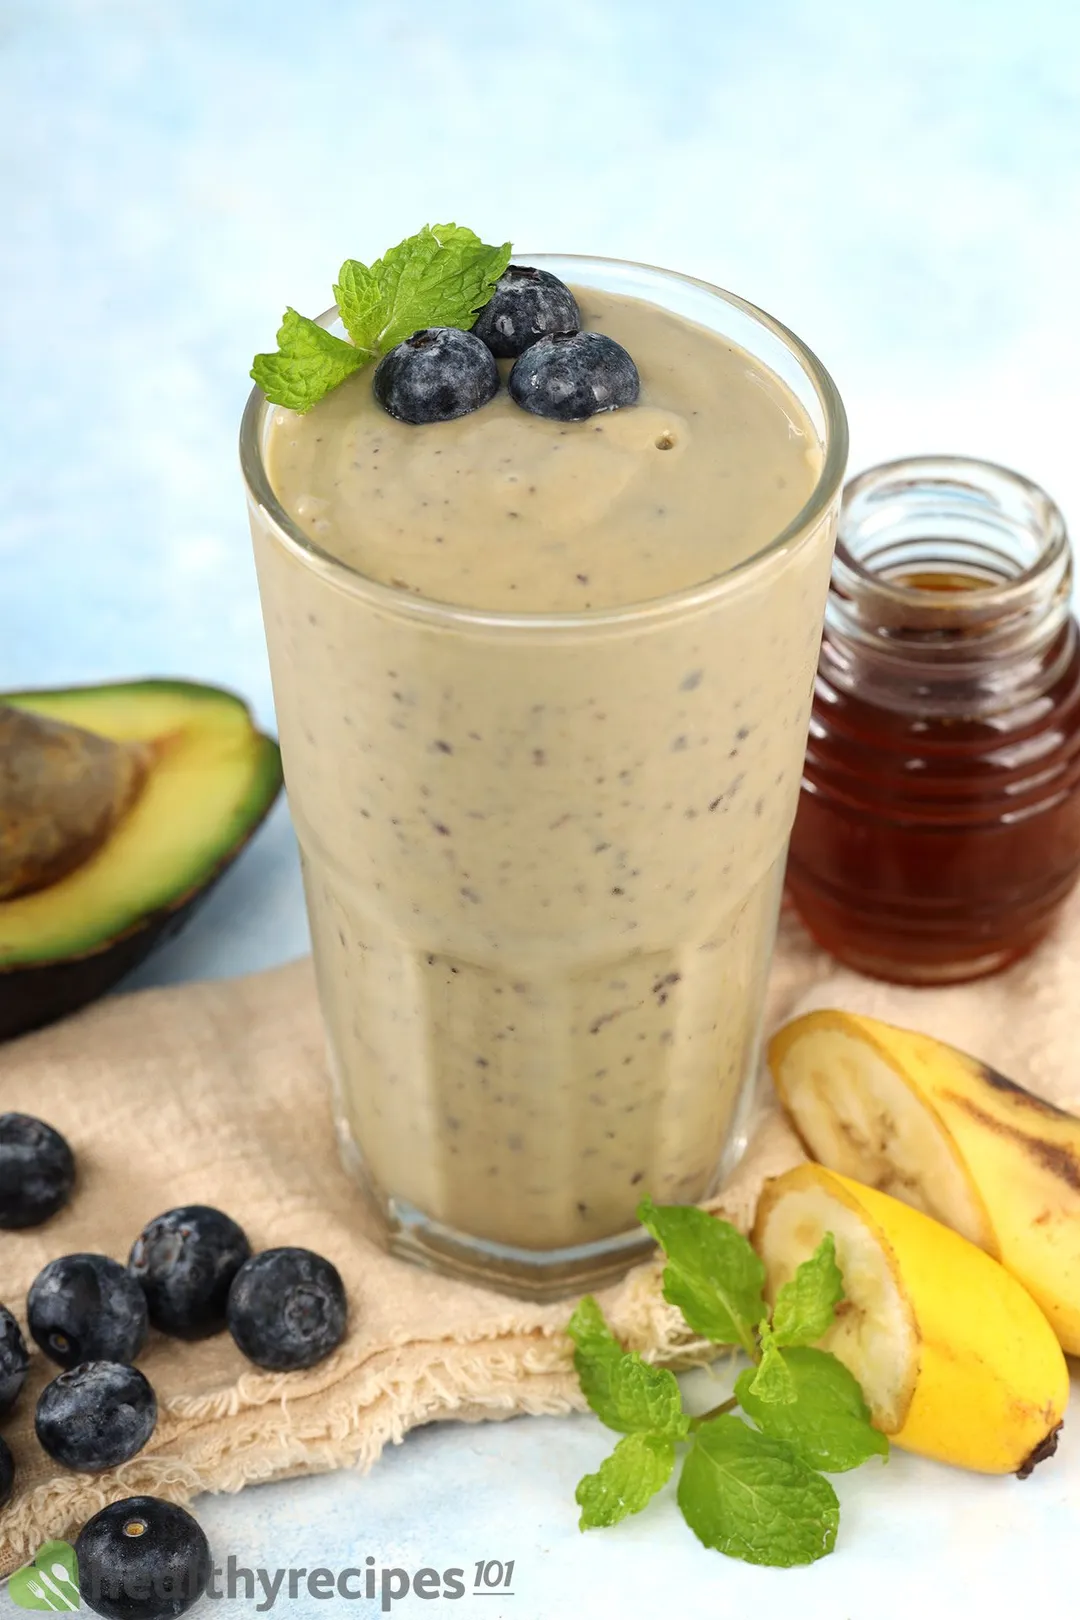 A glass of blueberry avocado smoothie laid on a wooden board near blueberries, mint leaves, a jar of honey, sliced bananas, and half an avocado.